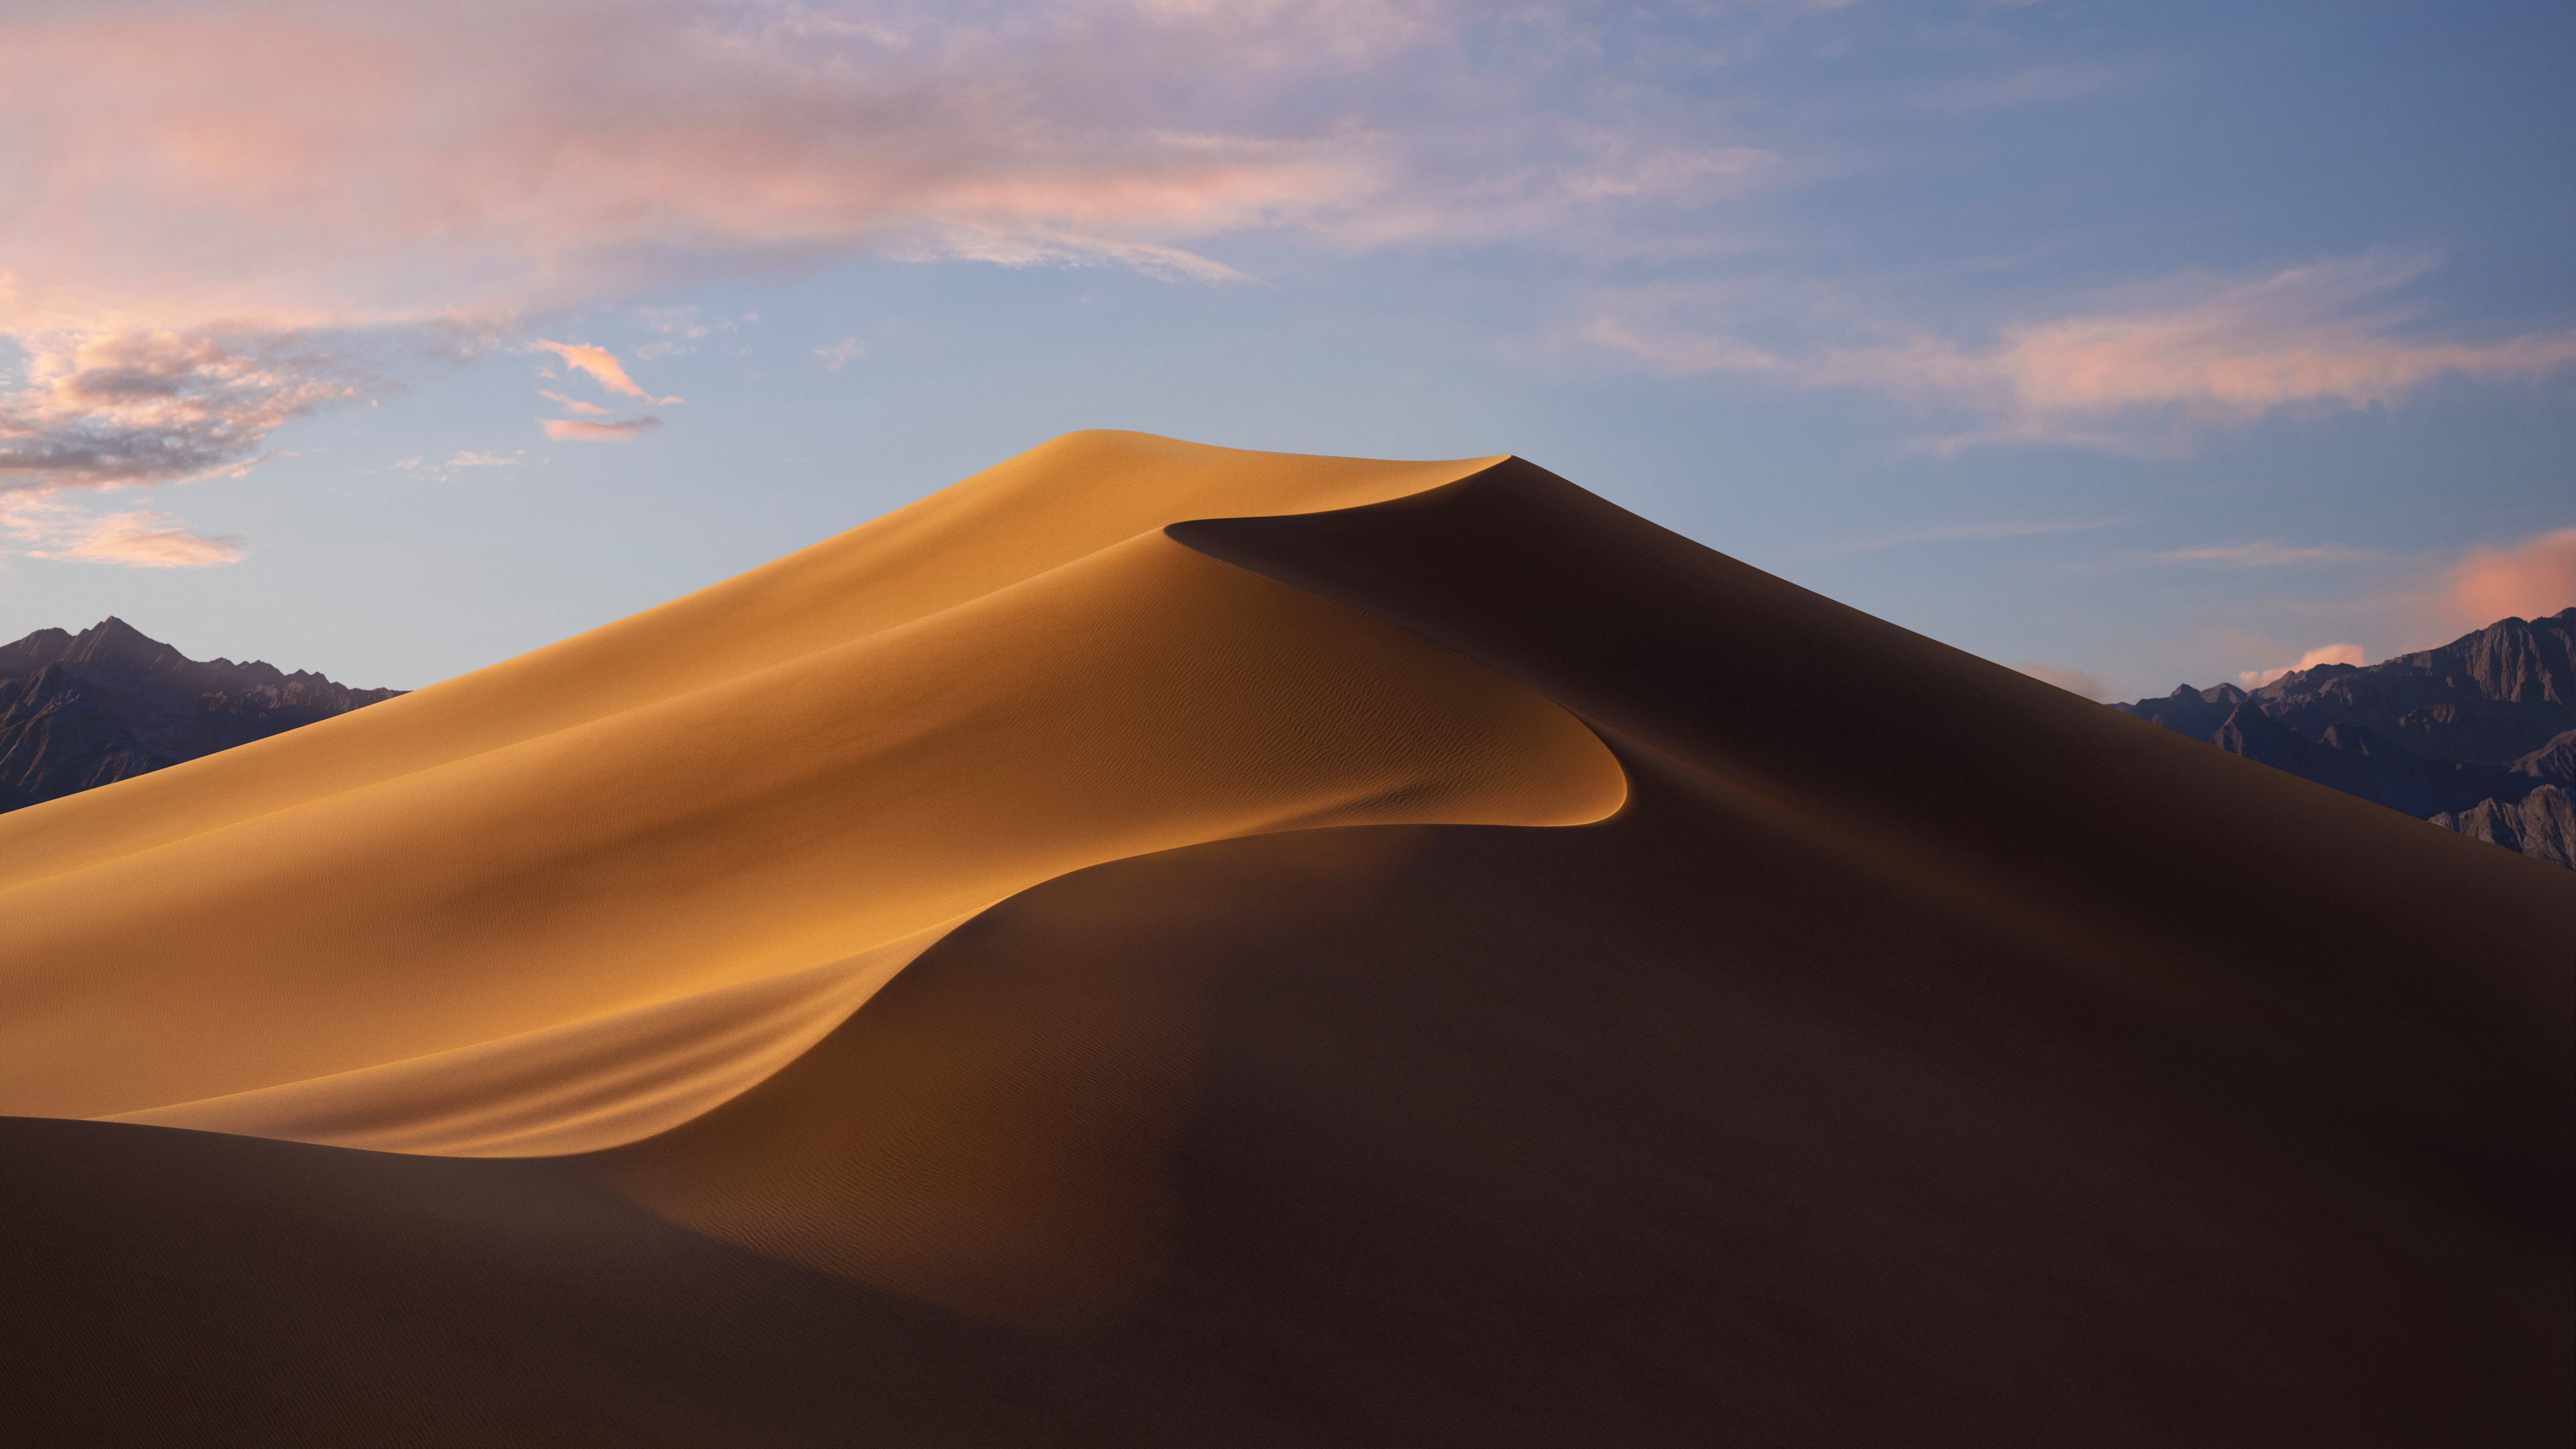 MacOS Mojave Includes Two Desert Themed Wallpaper, Download Here